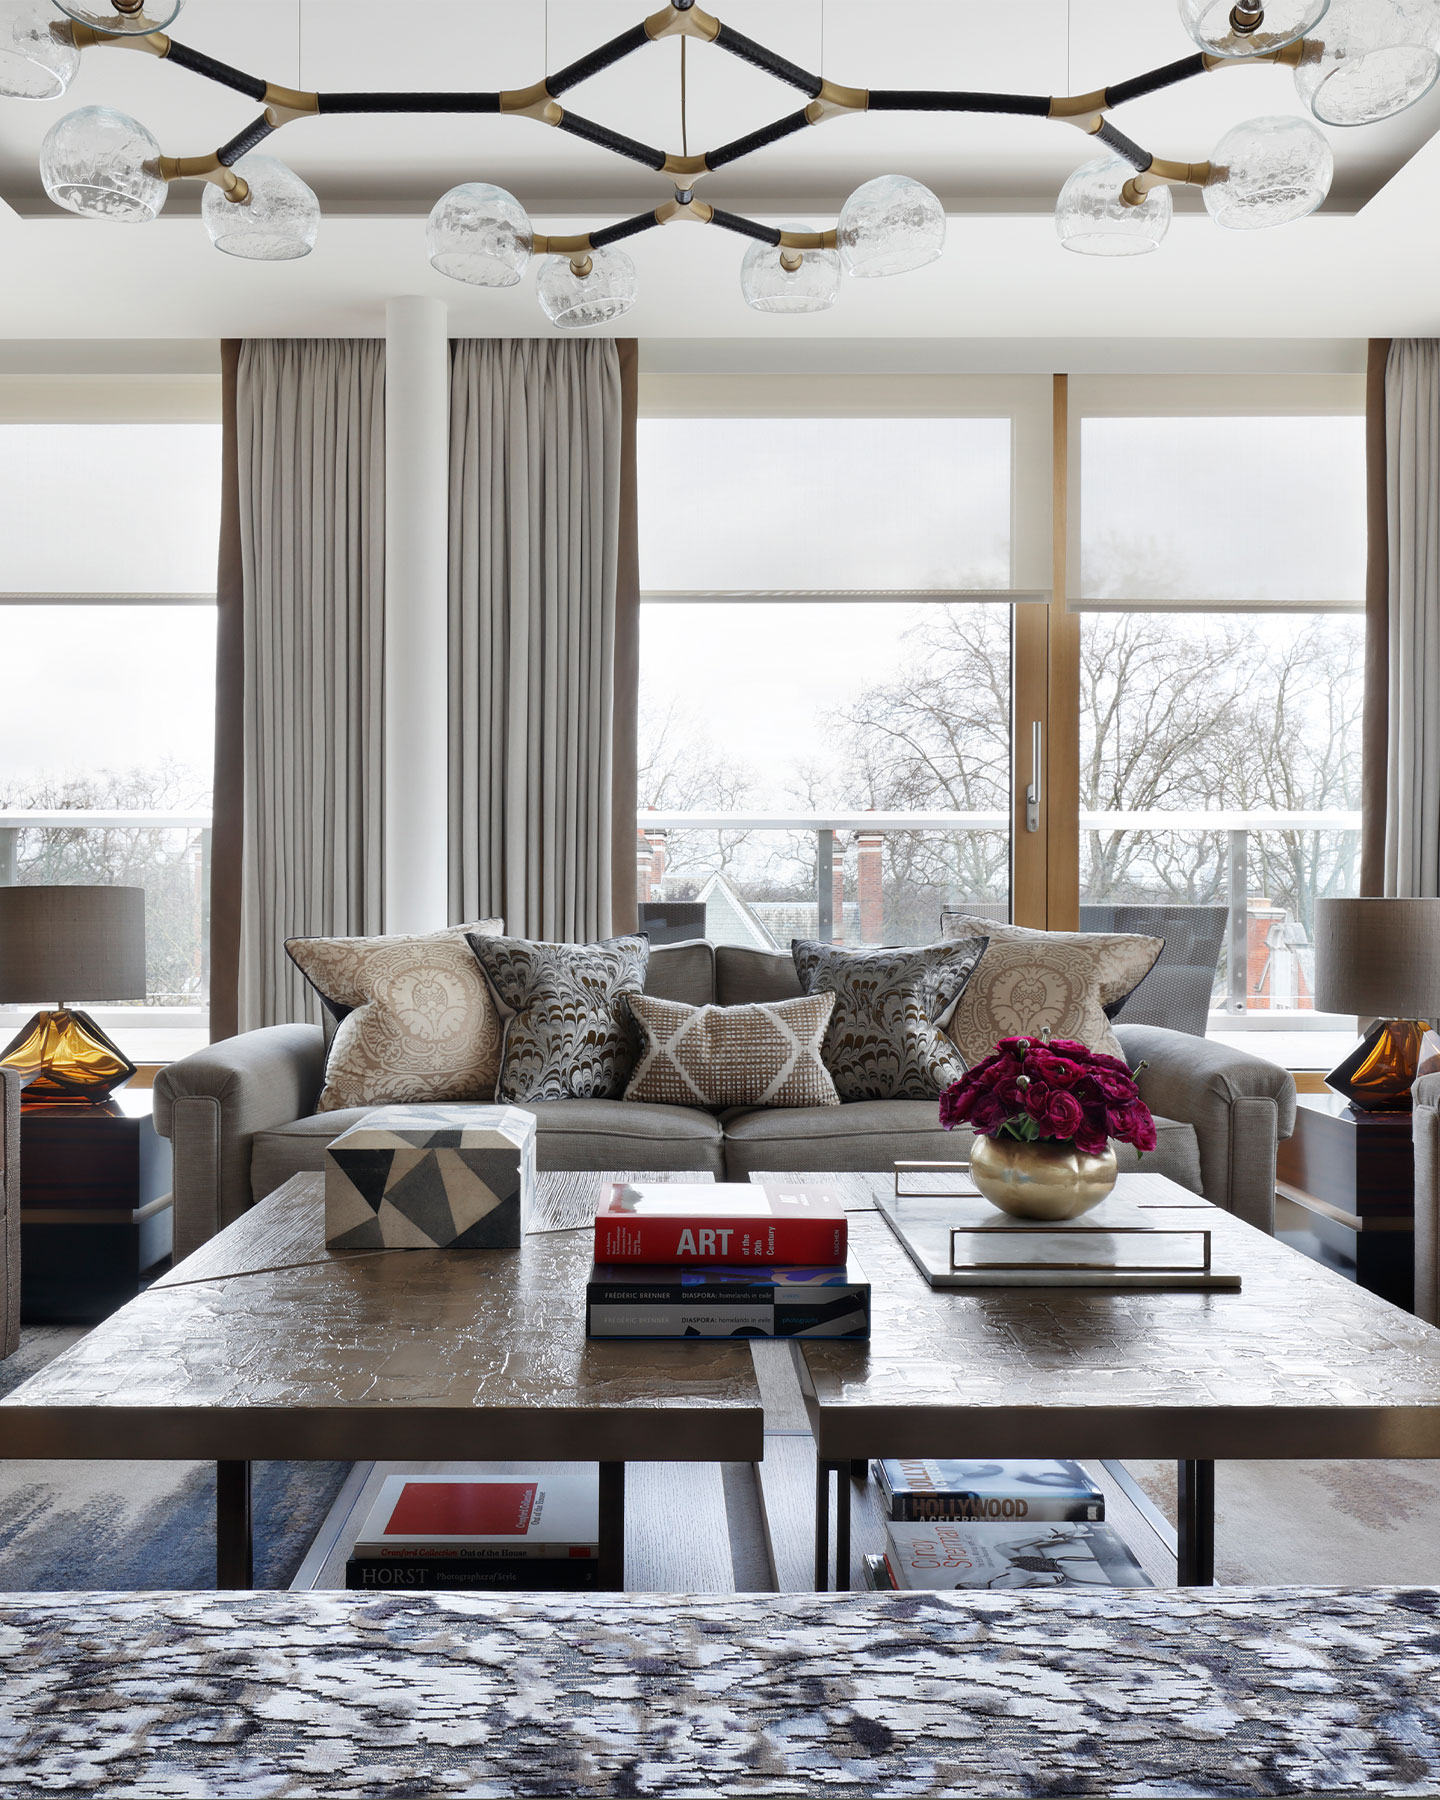 Helen Green Design Appointed to Design Lateral Apartment in South Kensington, Helen Green Design, Luxury Interior Design, Interior Architecture, Lateral Apartment, South Kensington, Kensington